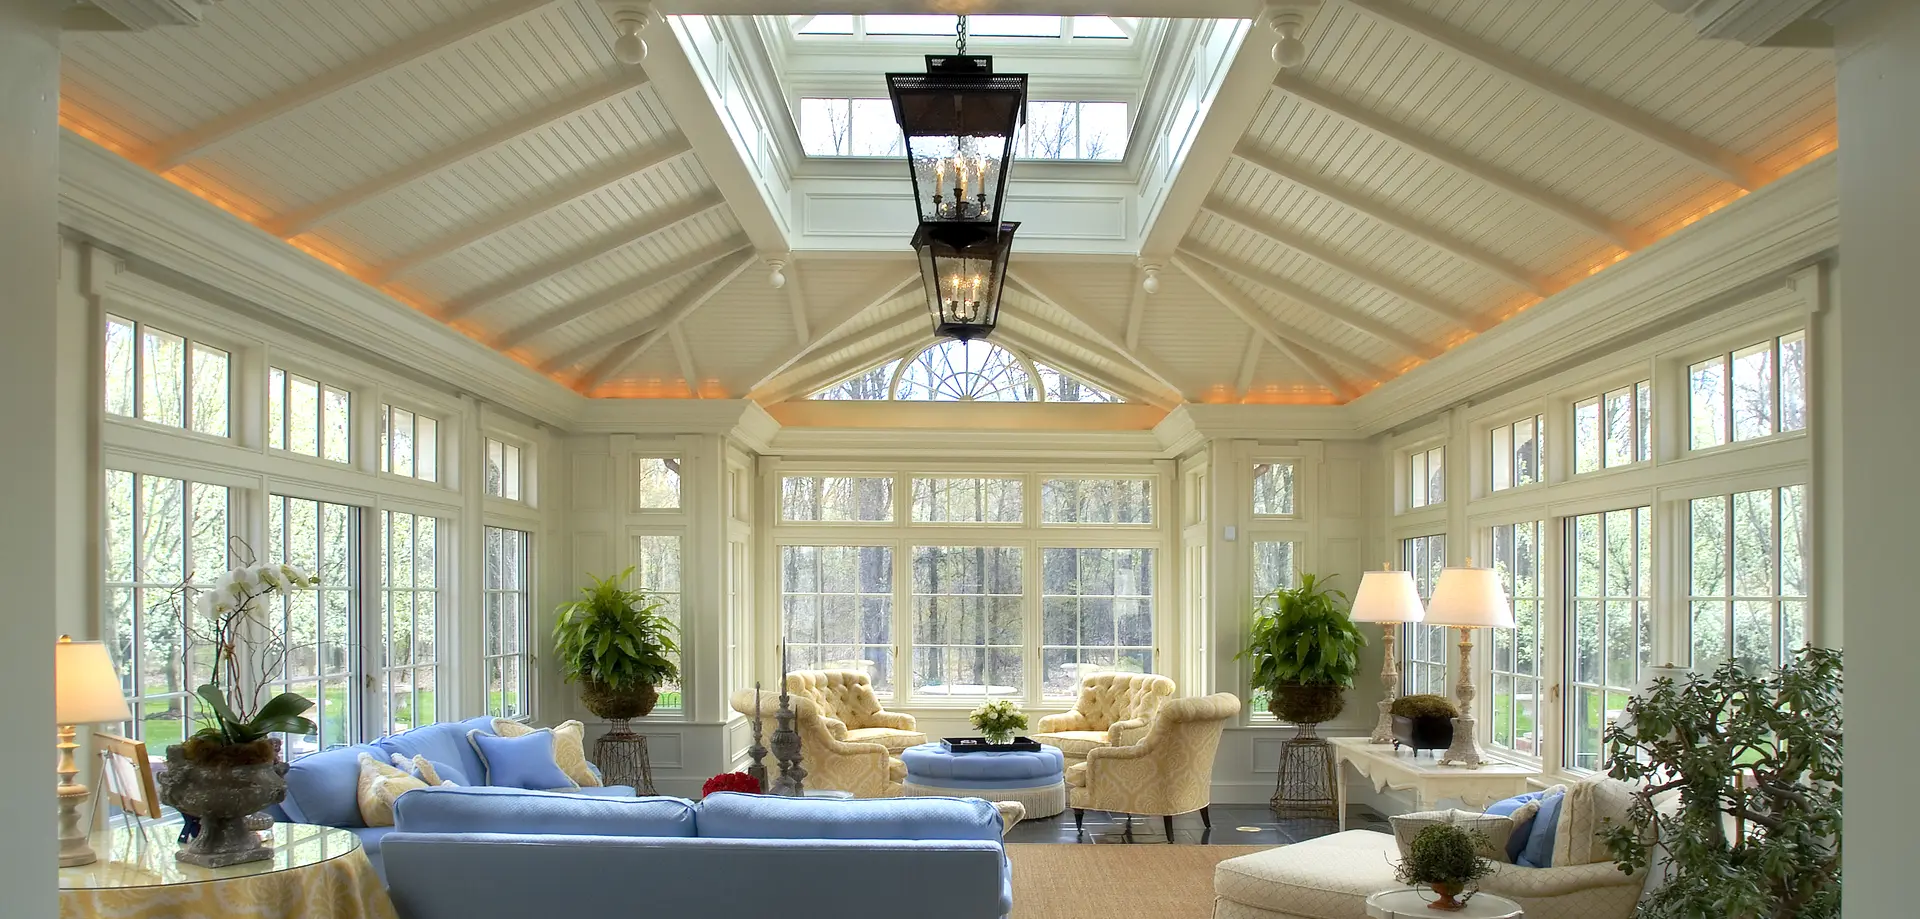 A living room with two large windows and a skylight.